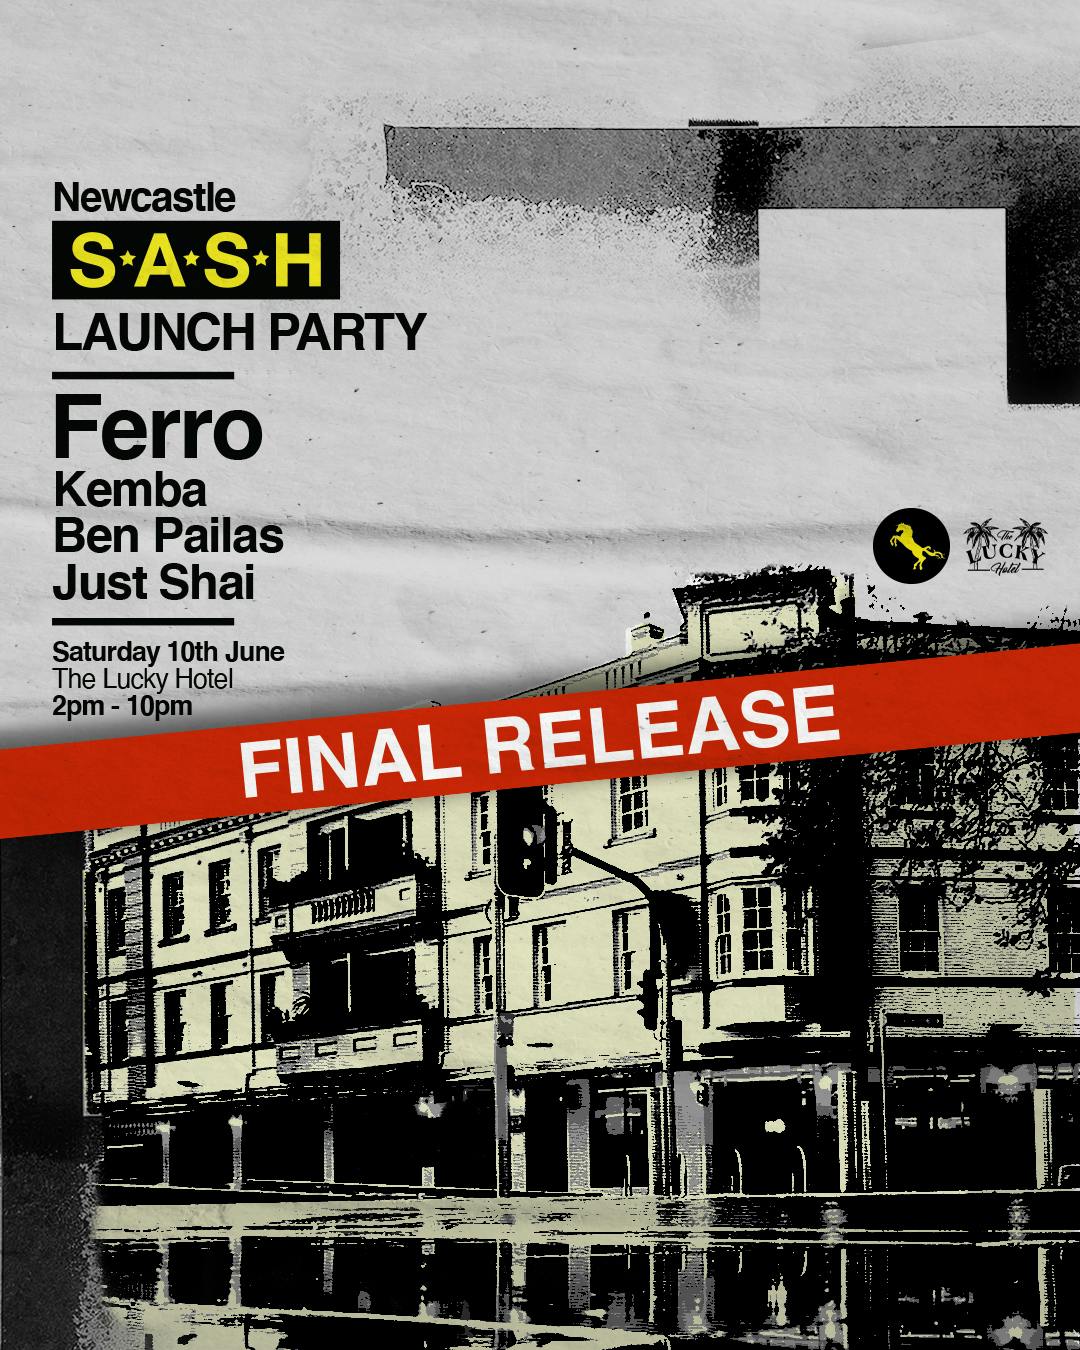 ★ S.A.S.H Newcastle ★ Launch Party ★ Ferro ★ King’s Birthday Long Weekend ★ Sat 10th June ★